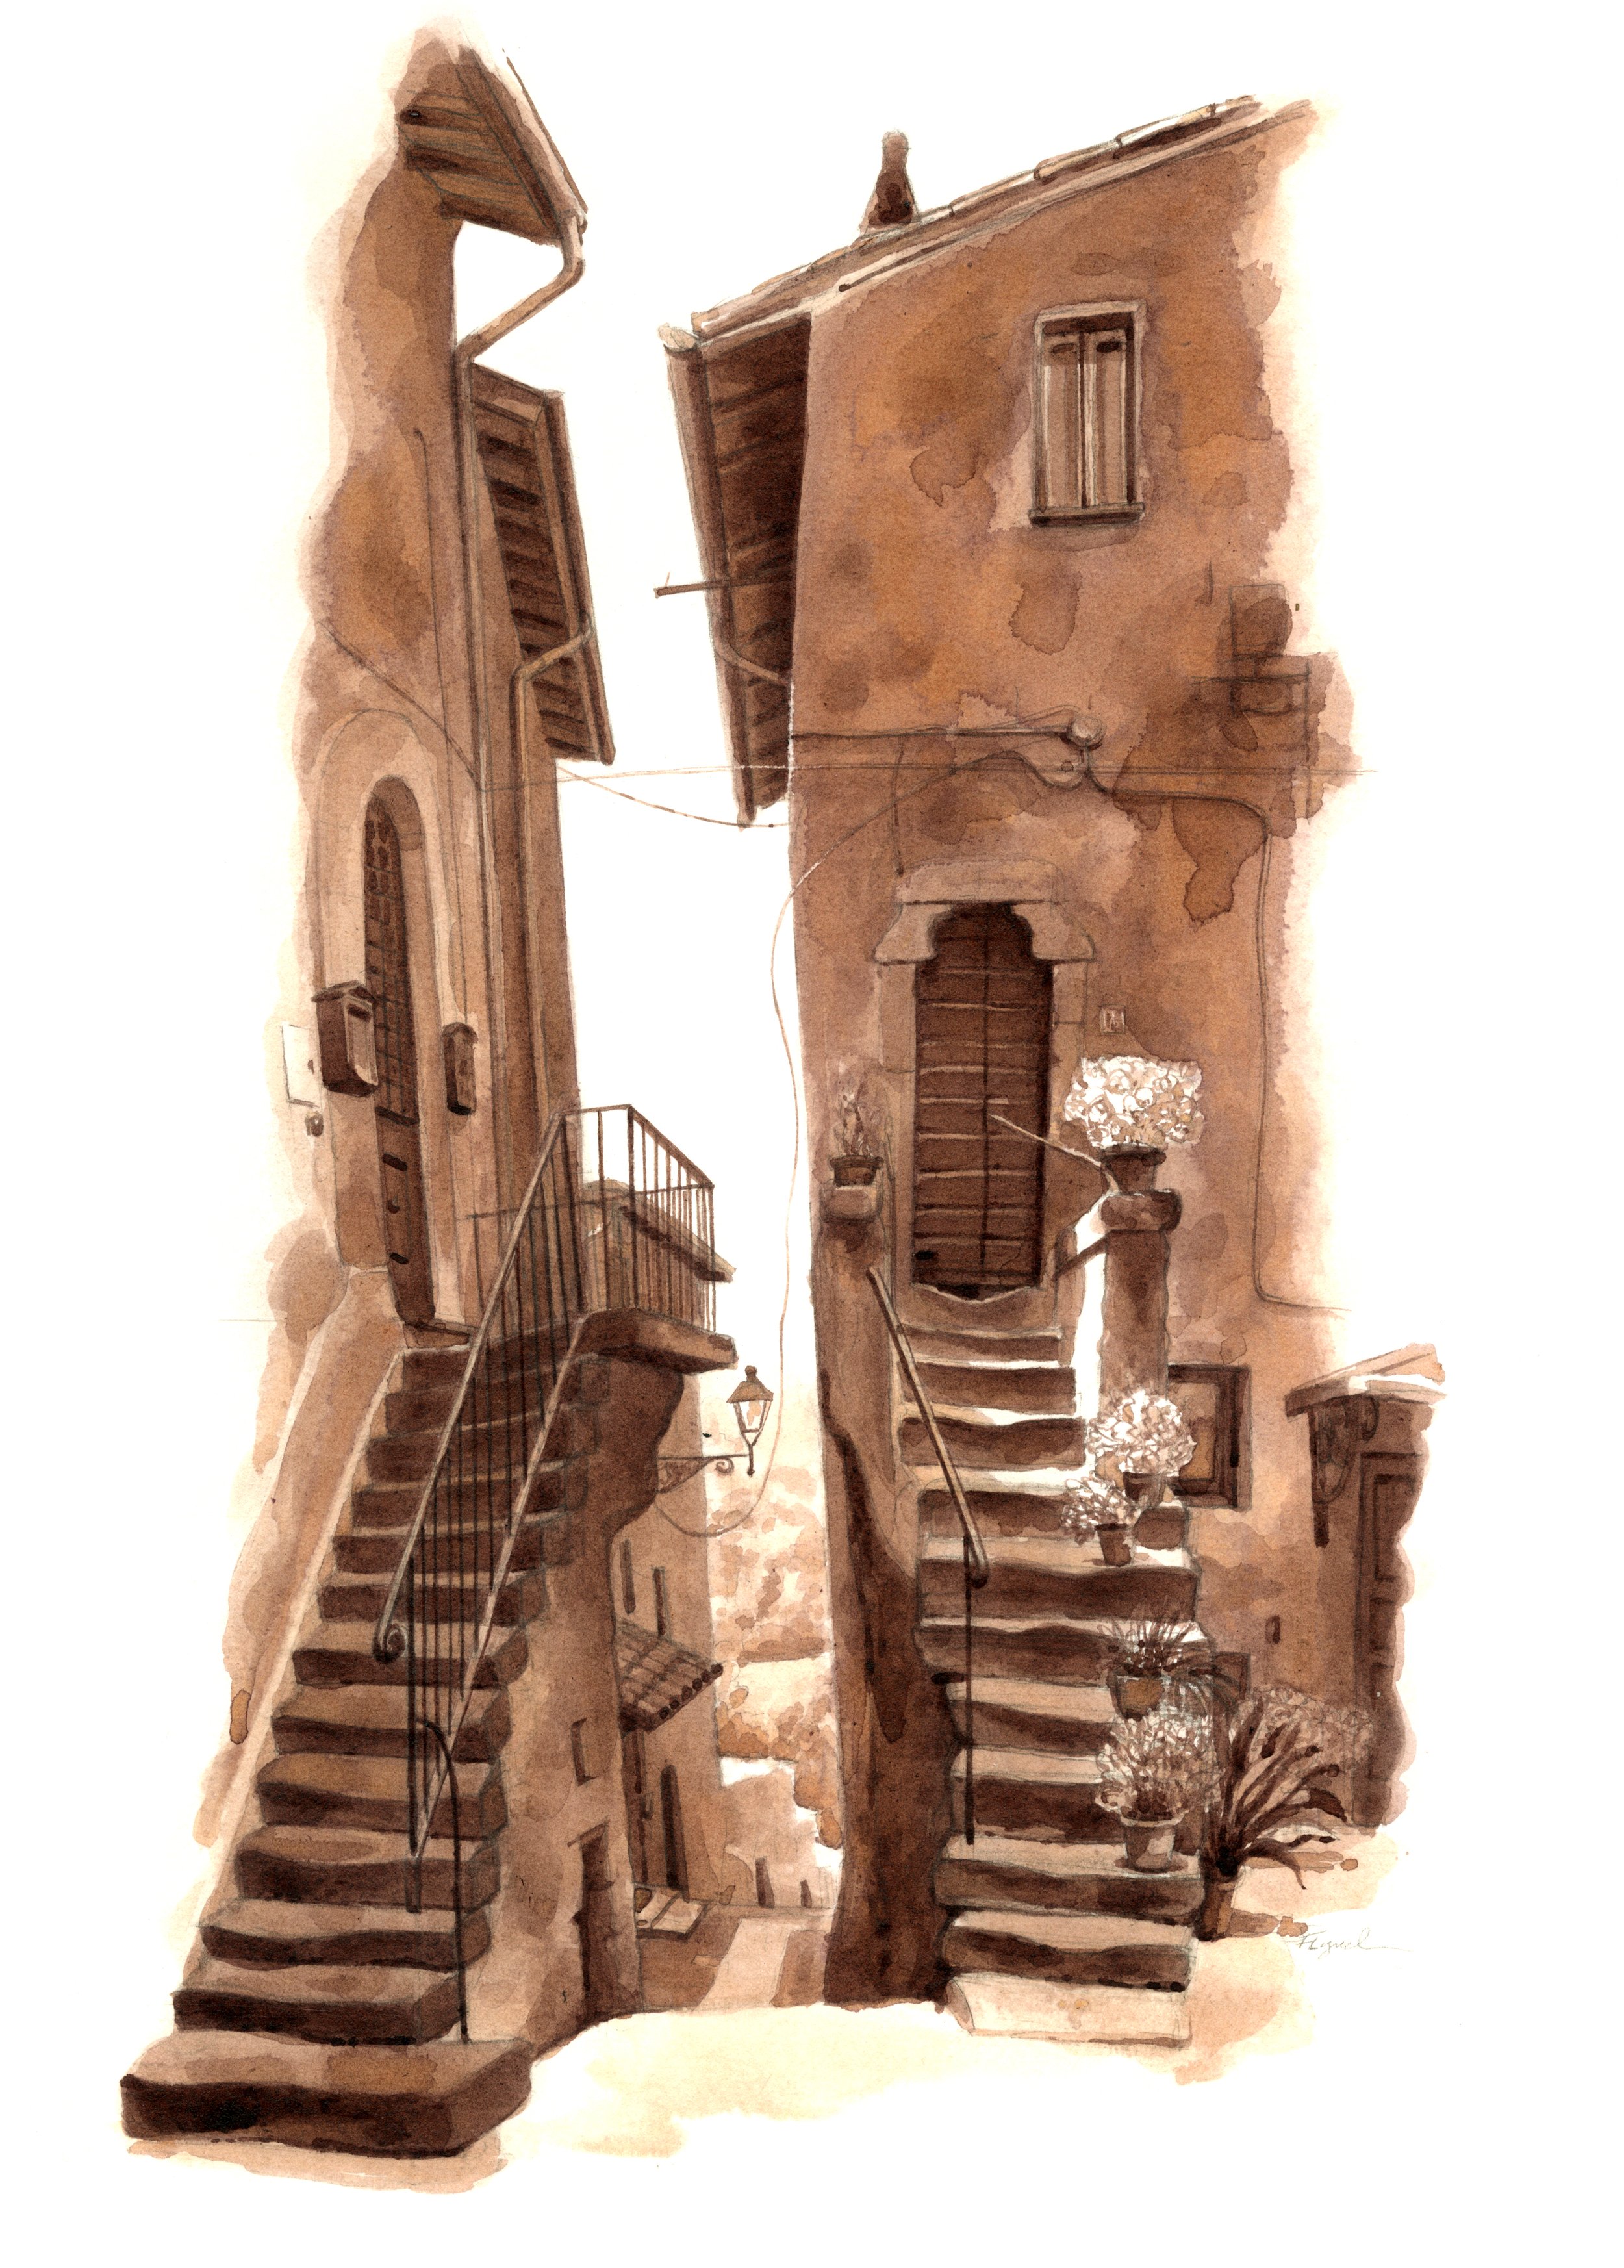 A Pair of Stairs (in Medieval Vitorchiano)